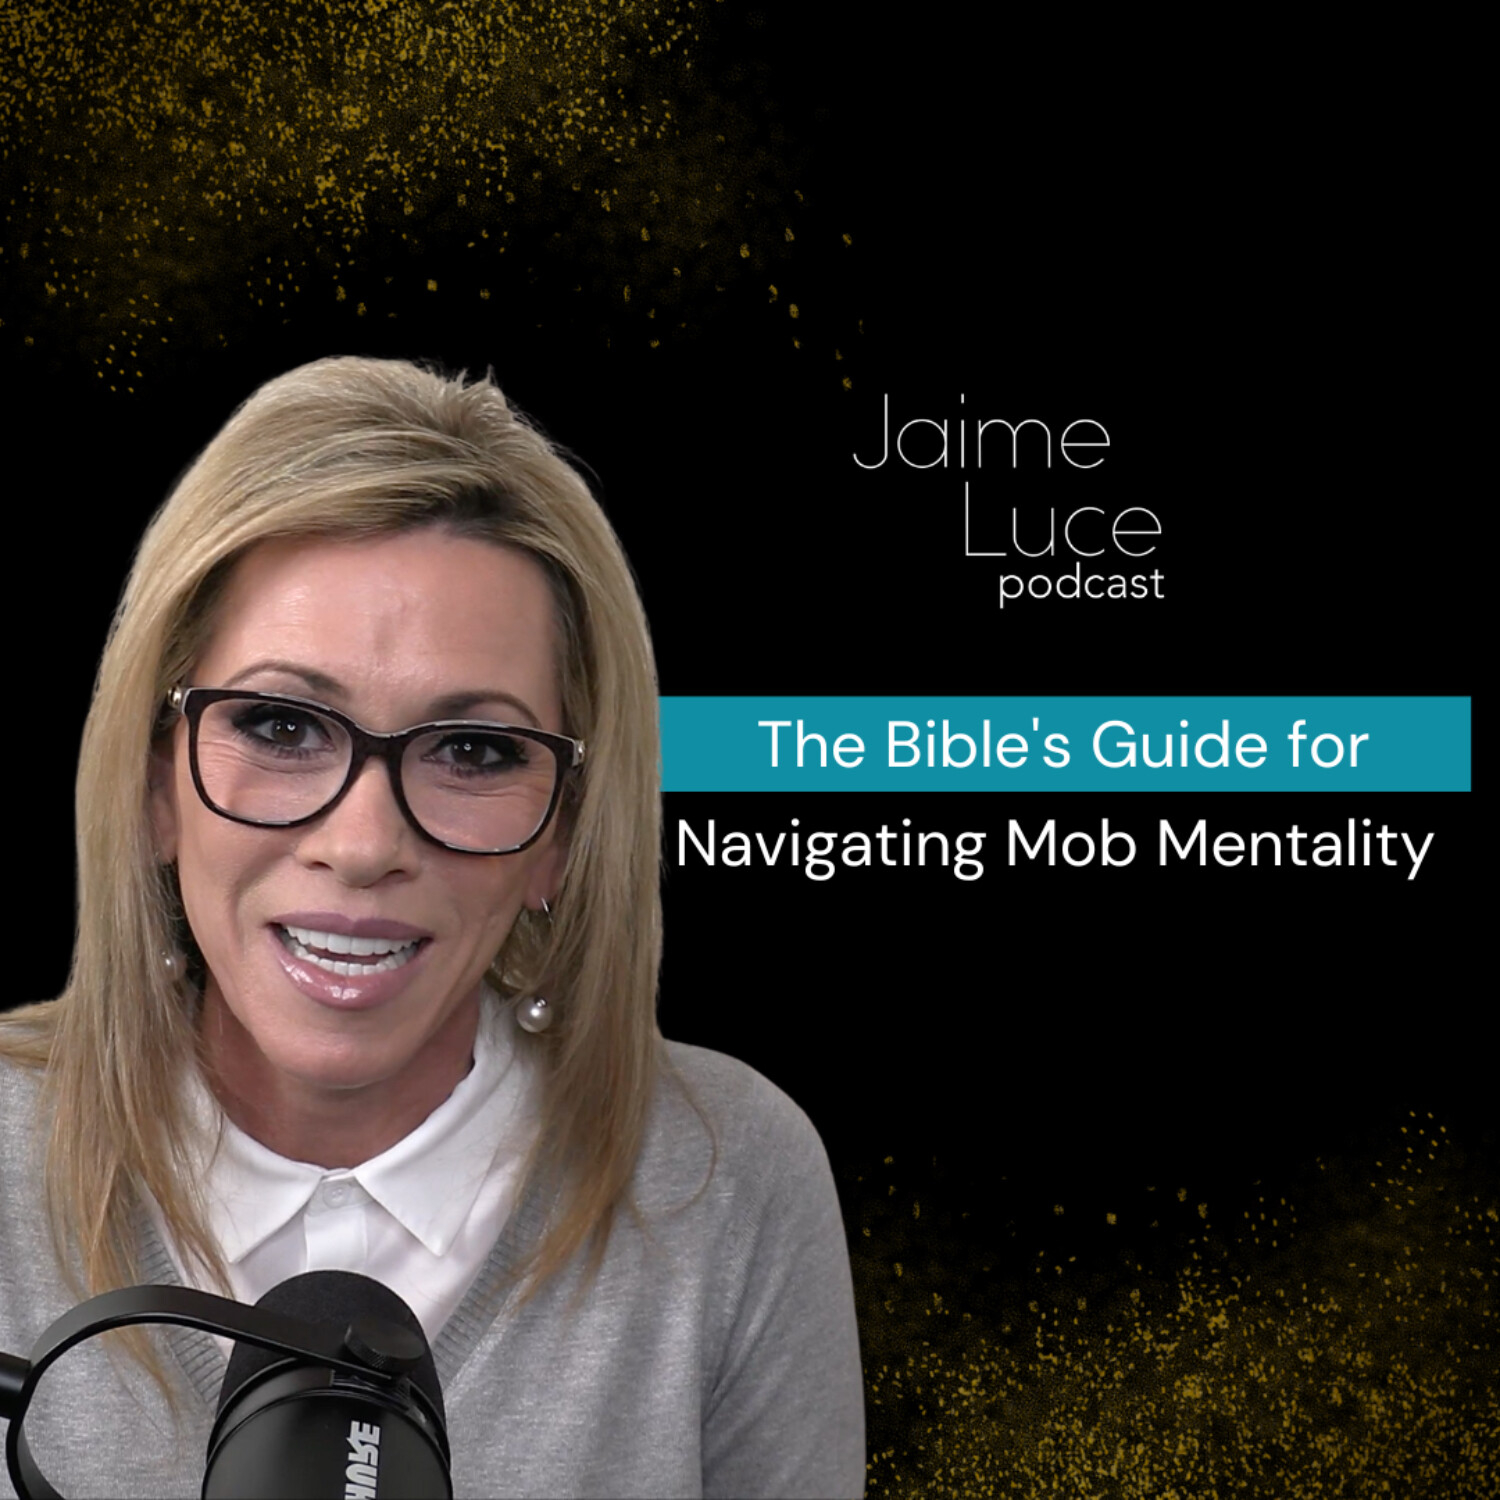 The Bible's Guide for Navigating Mob Mentality